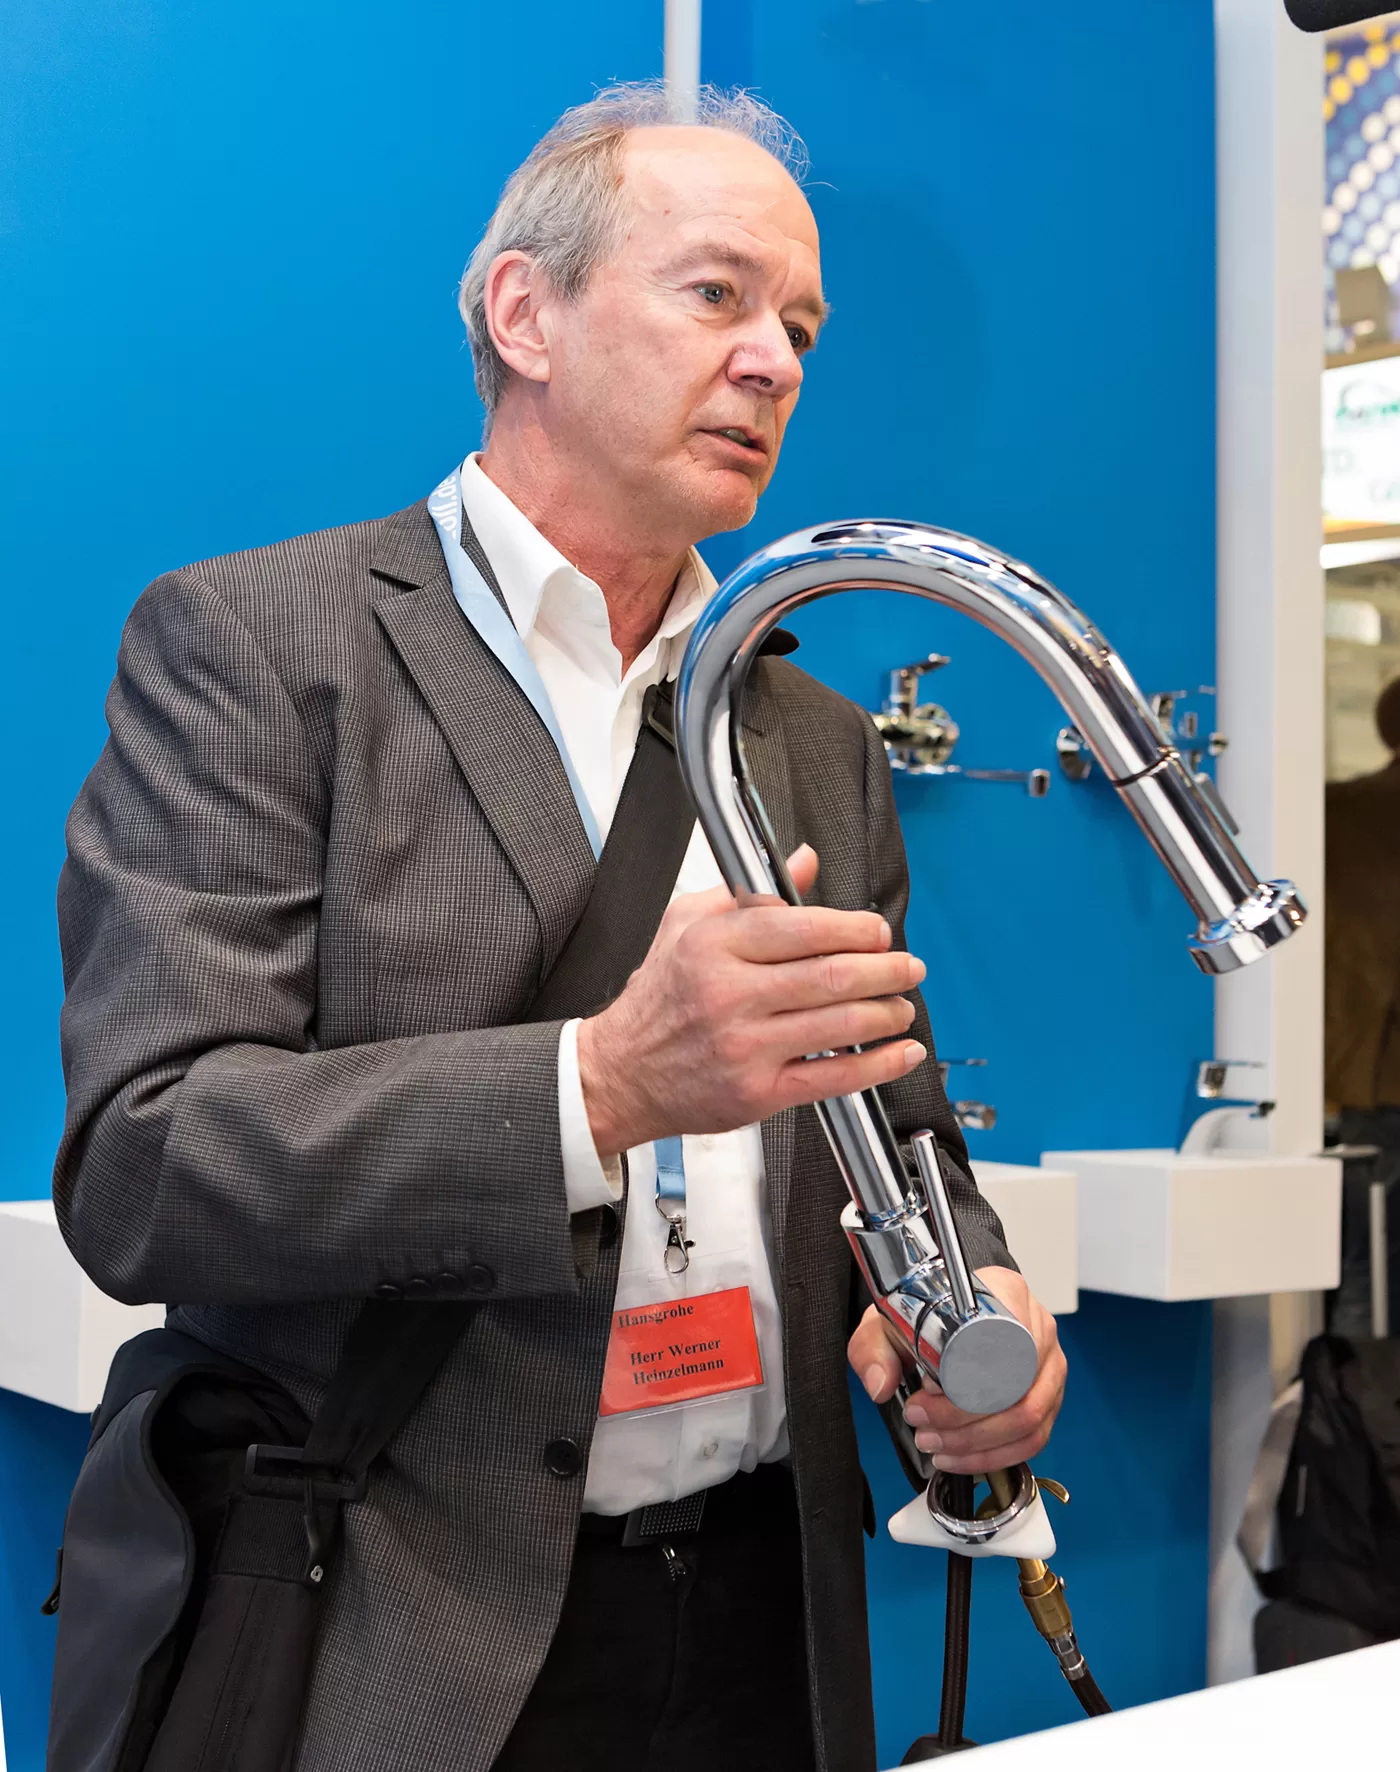 Werner Heinzelmann, Head of the Patents and Intellectual Property Rights division at Hansgrohe SE, removes a pirate copy of a Hansgrohe kitchen mixer from circulation at the ISH trade fair in Frankfurt.